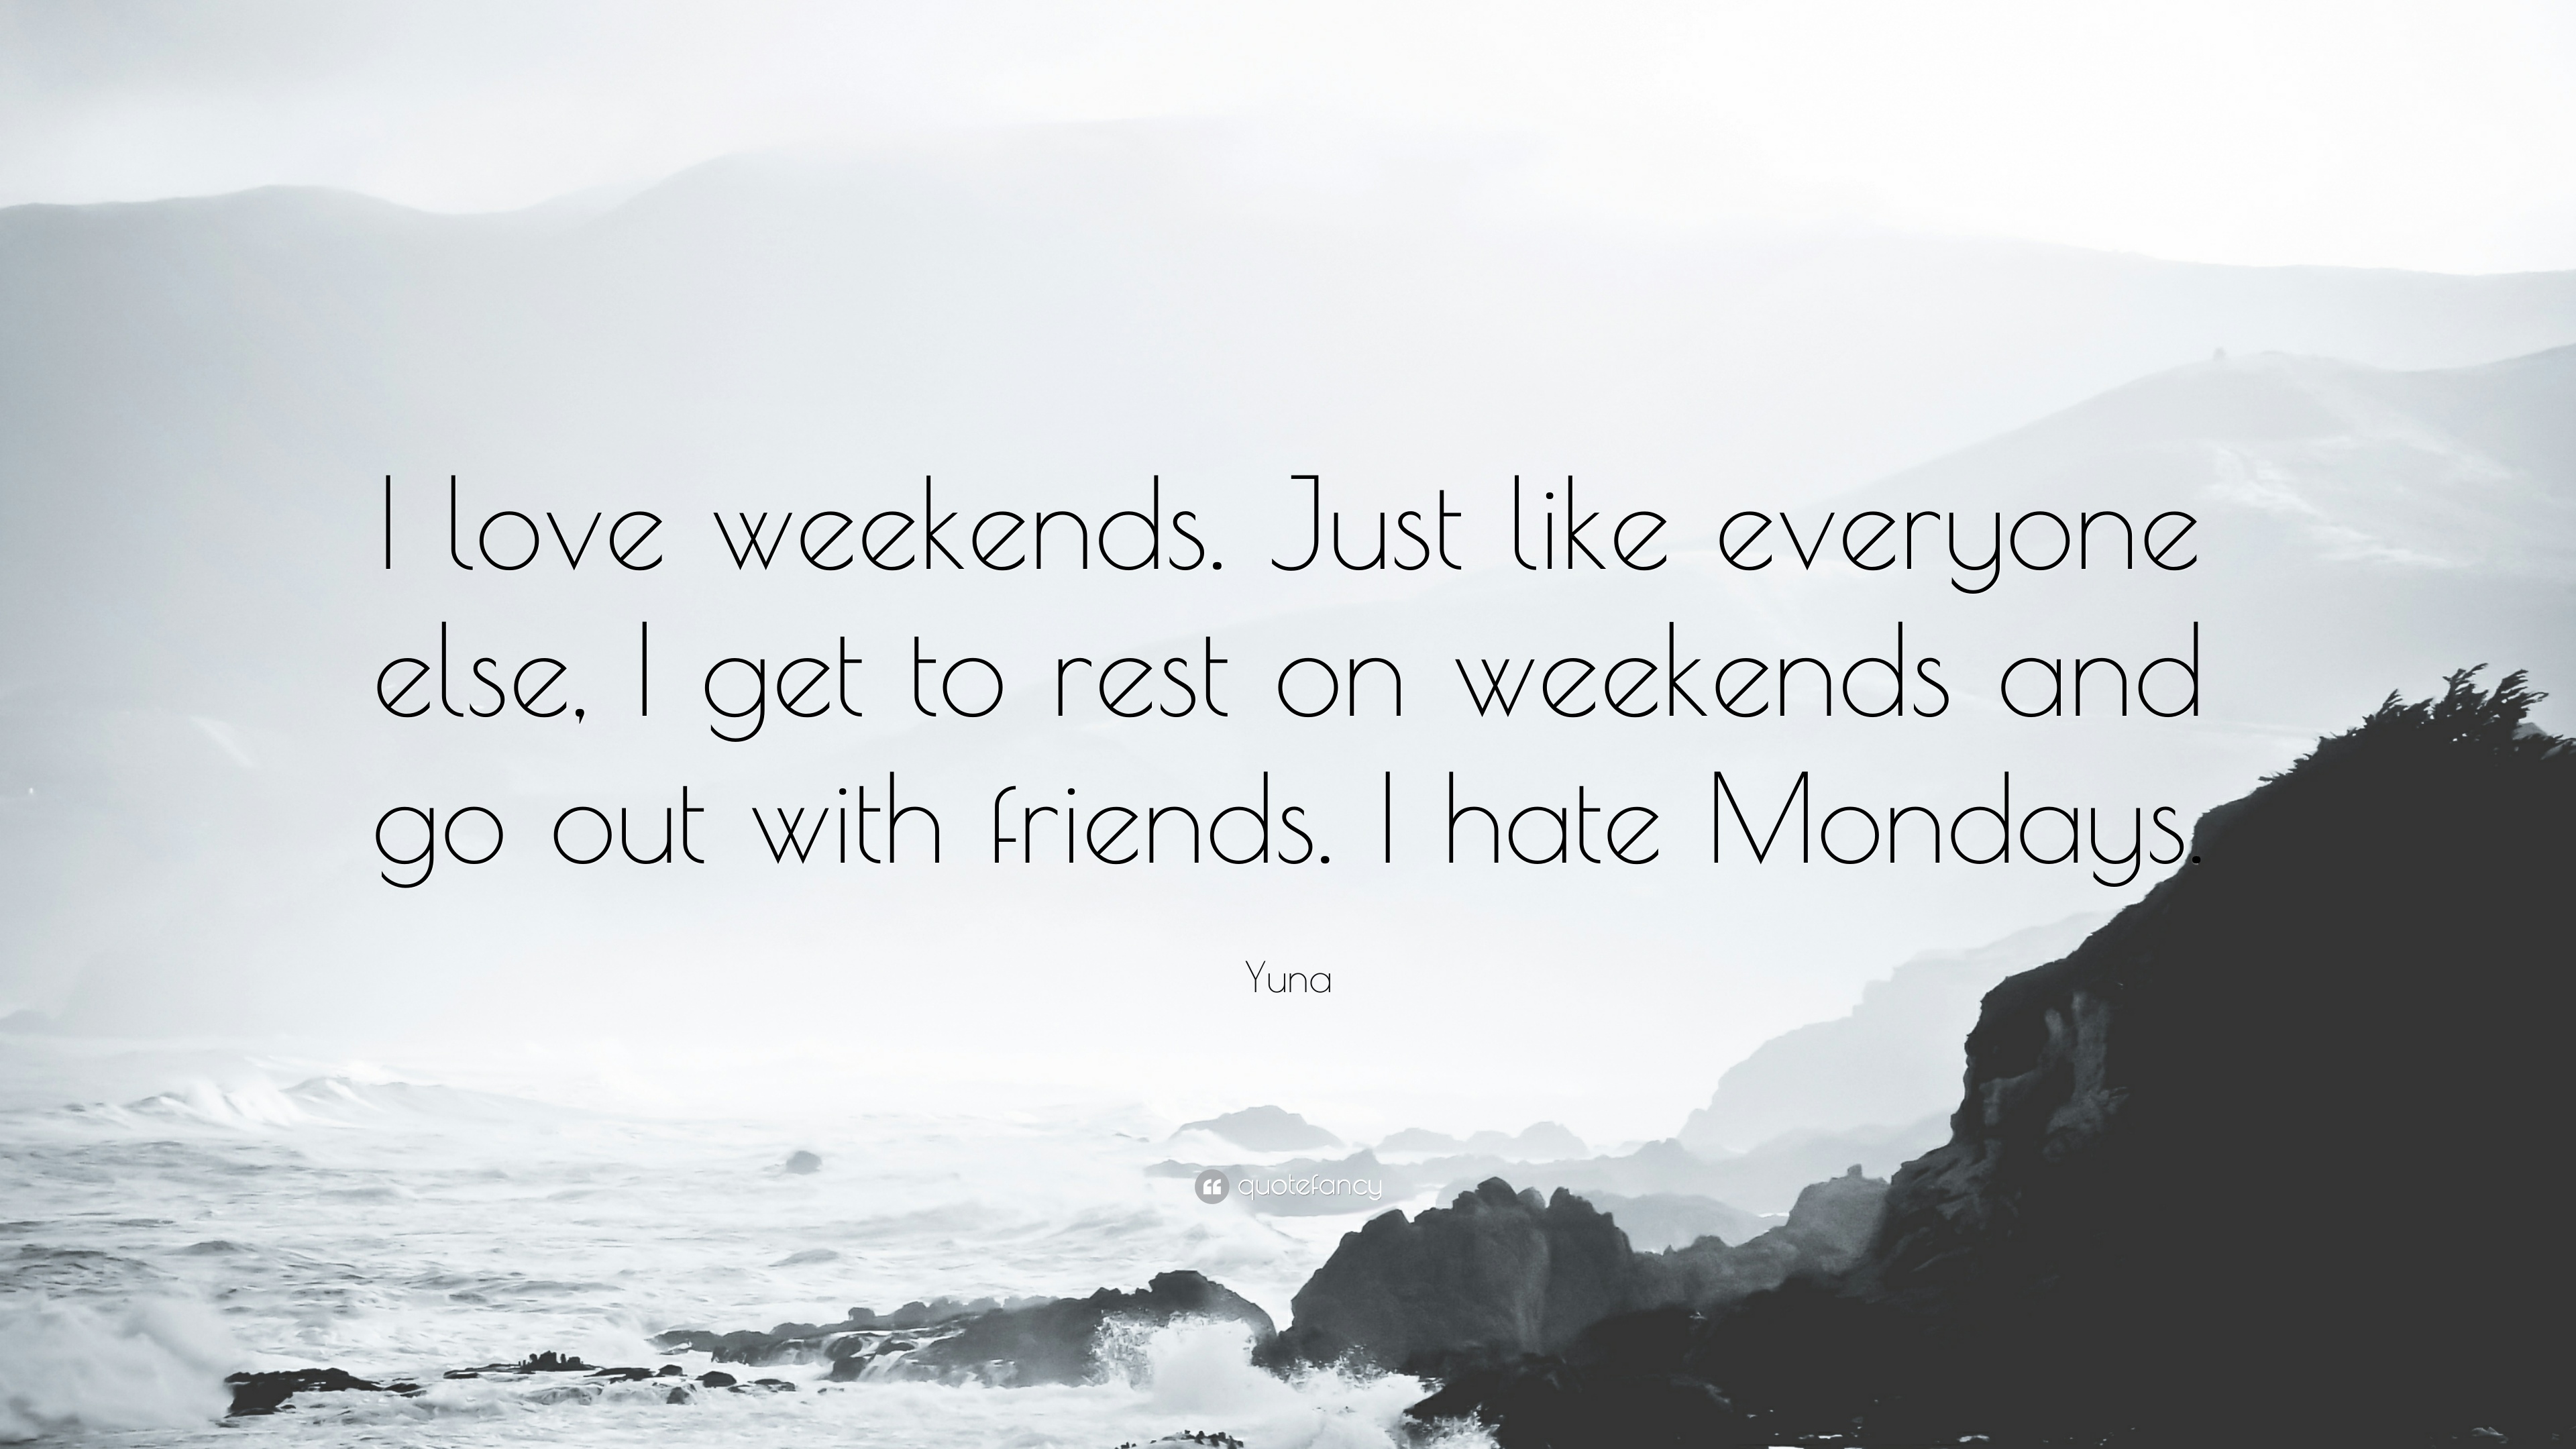 Yuna Quote: “I love weekends. Just like everyone else, I get to rest